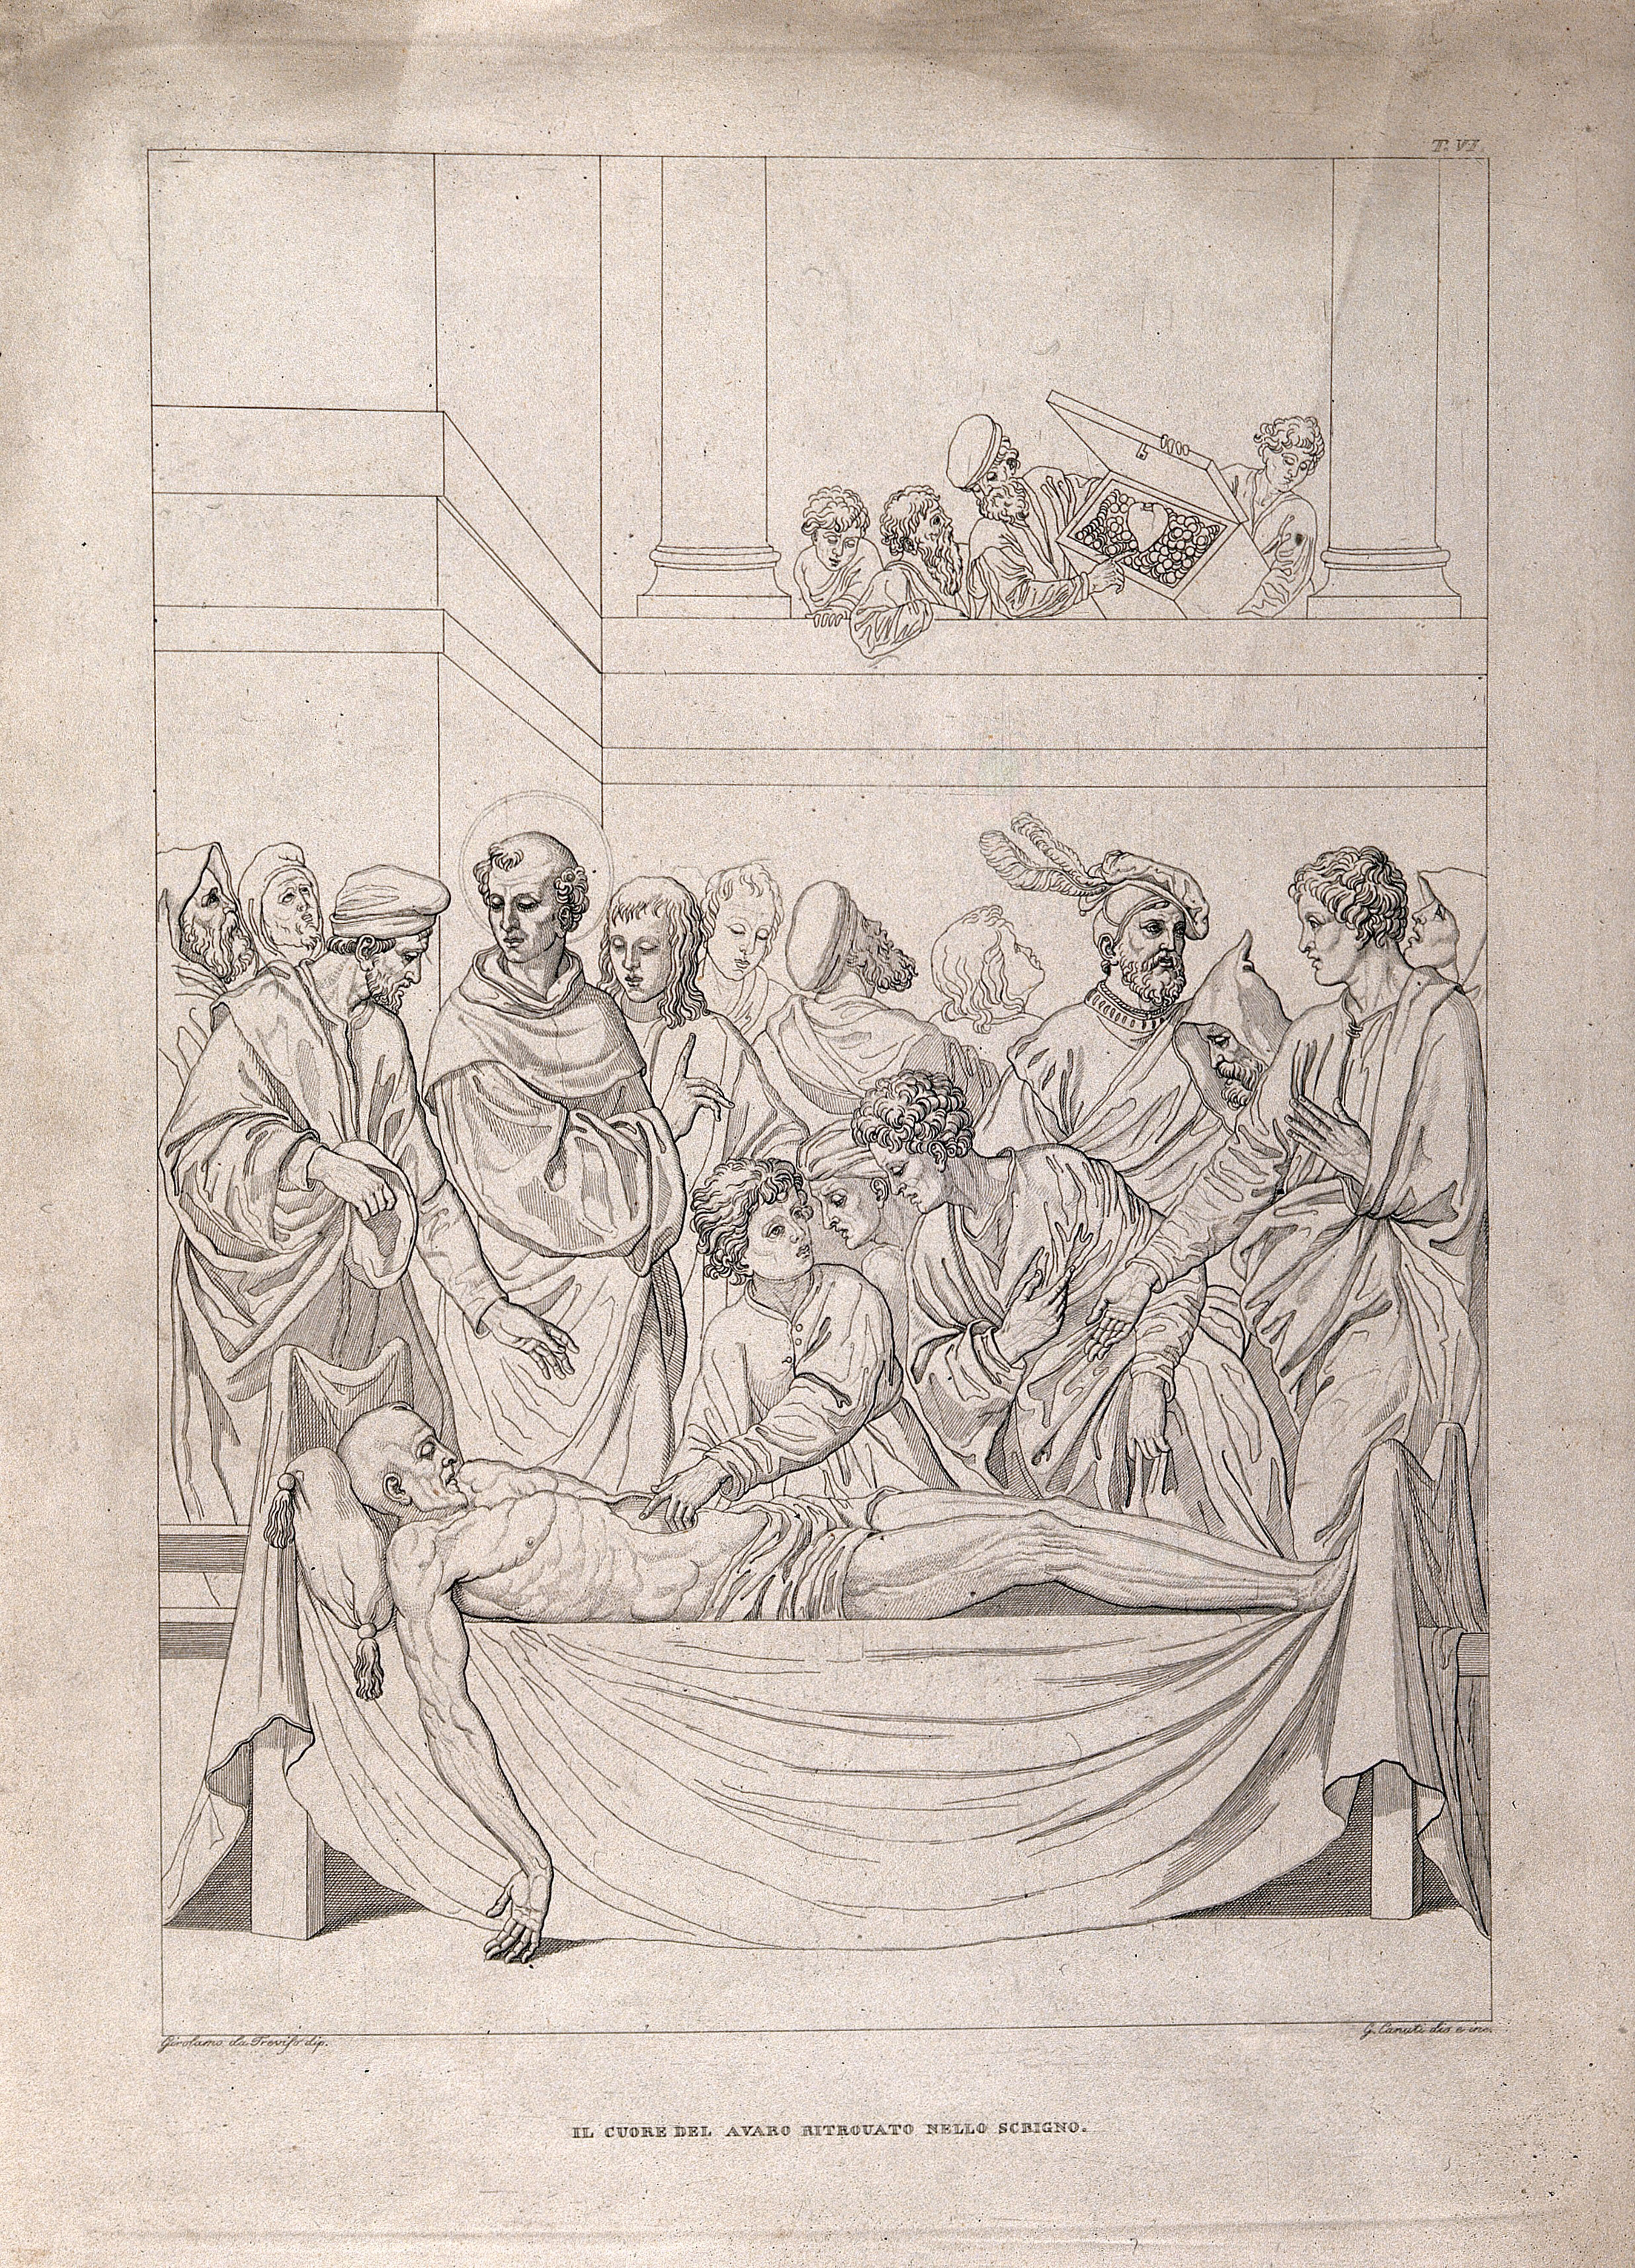 The dissection of the body of a miser in the presence of St Anthony of Padua: the miser's heart is found not in his body, but in a casket with his money. Engraving by G. Canuti after Girolamo da Treviso.